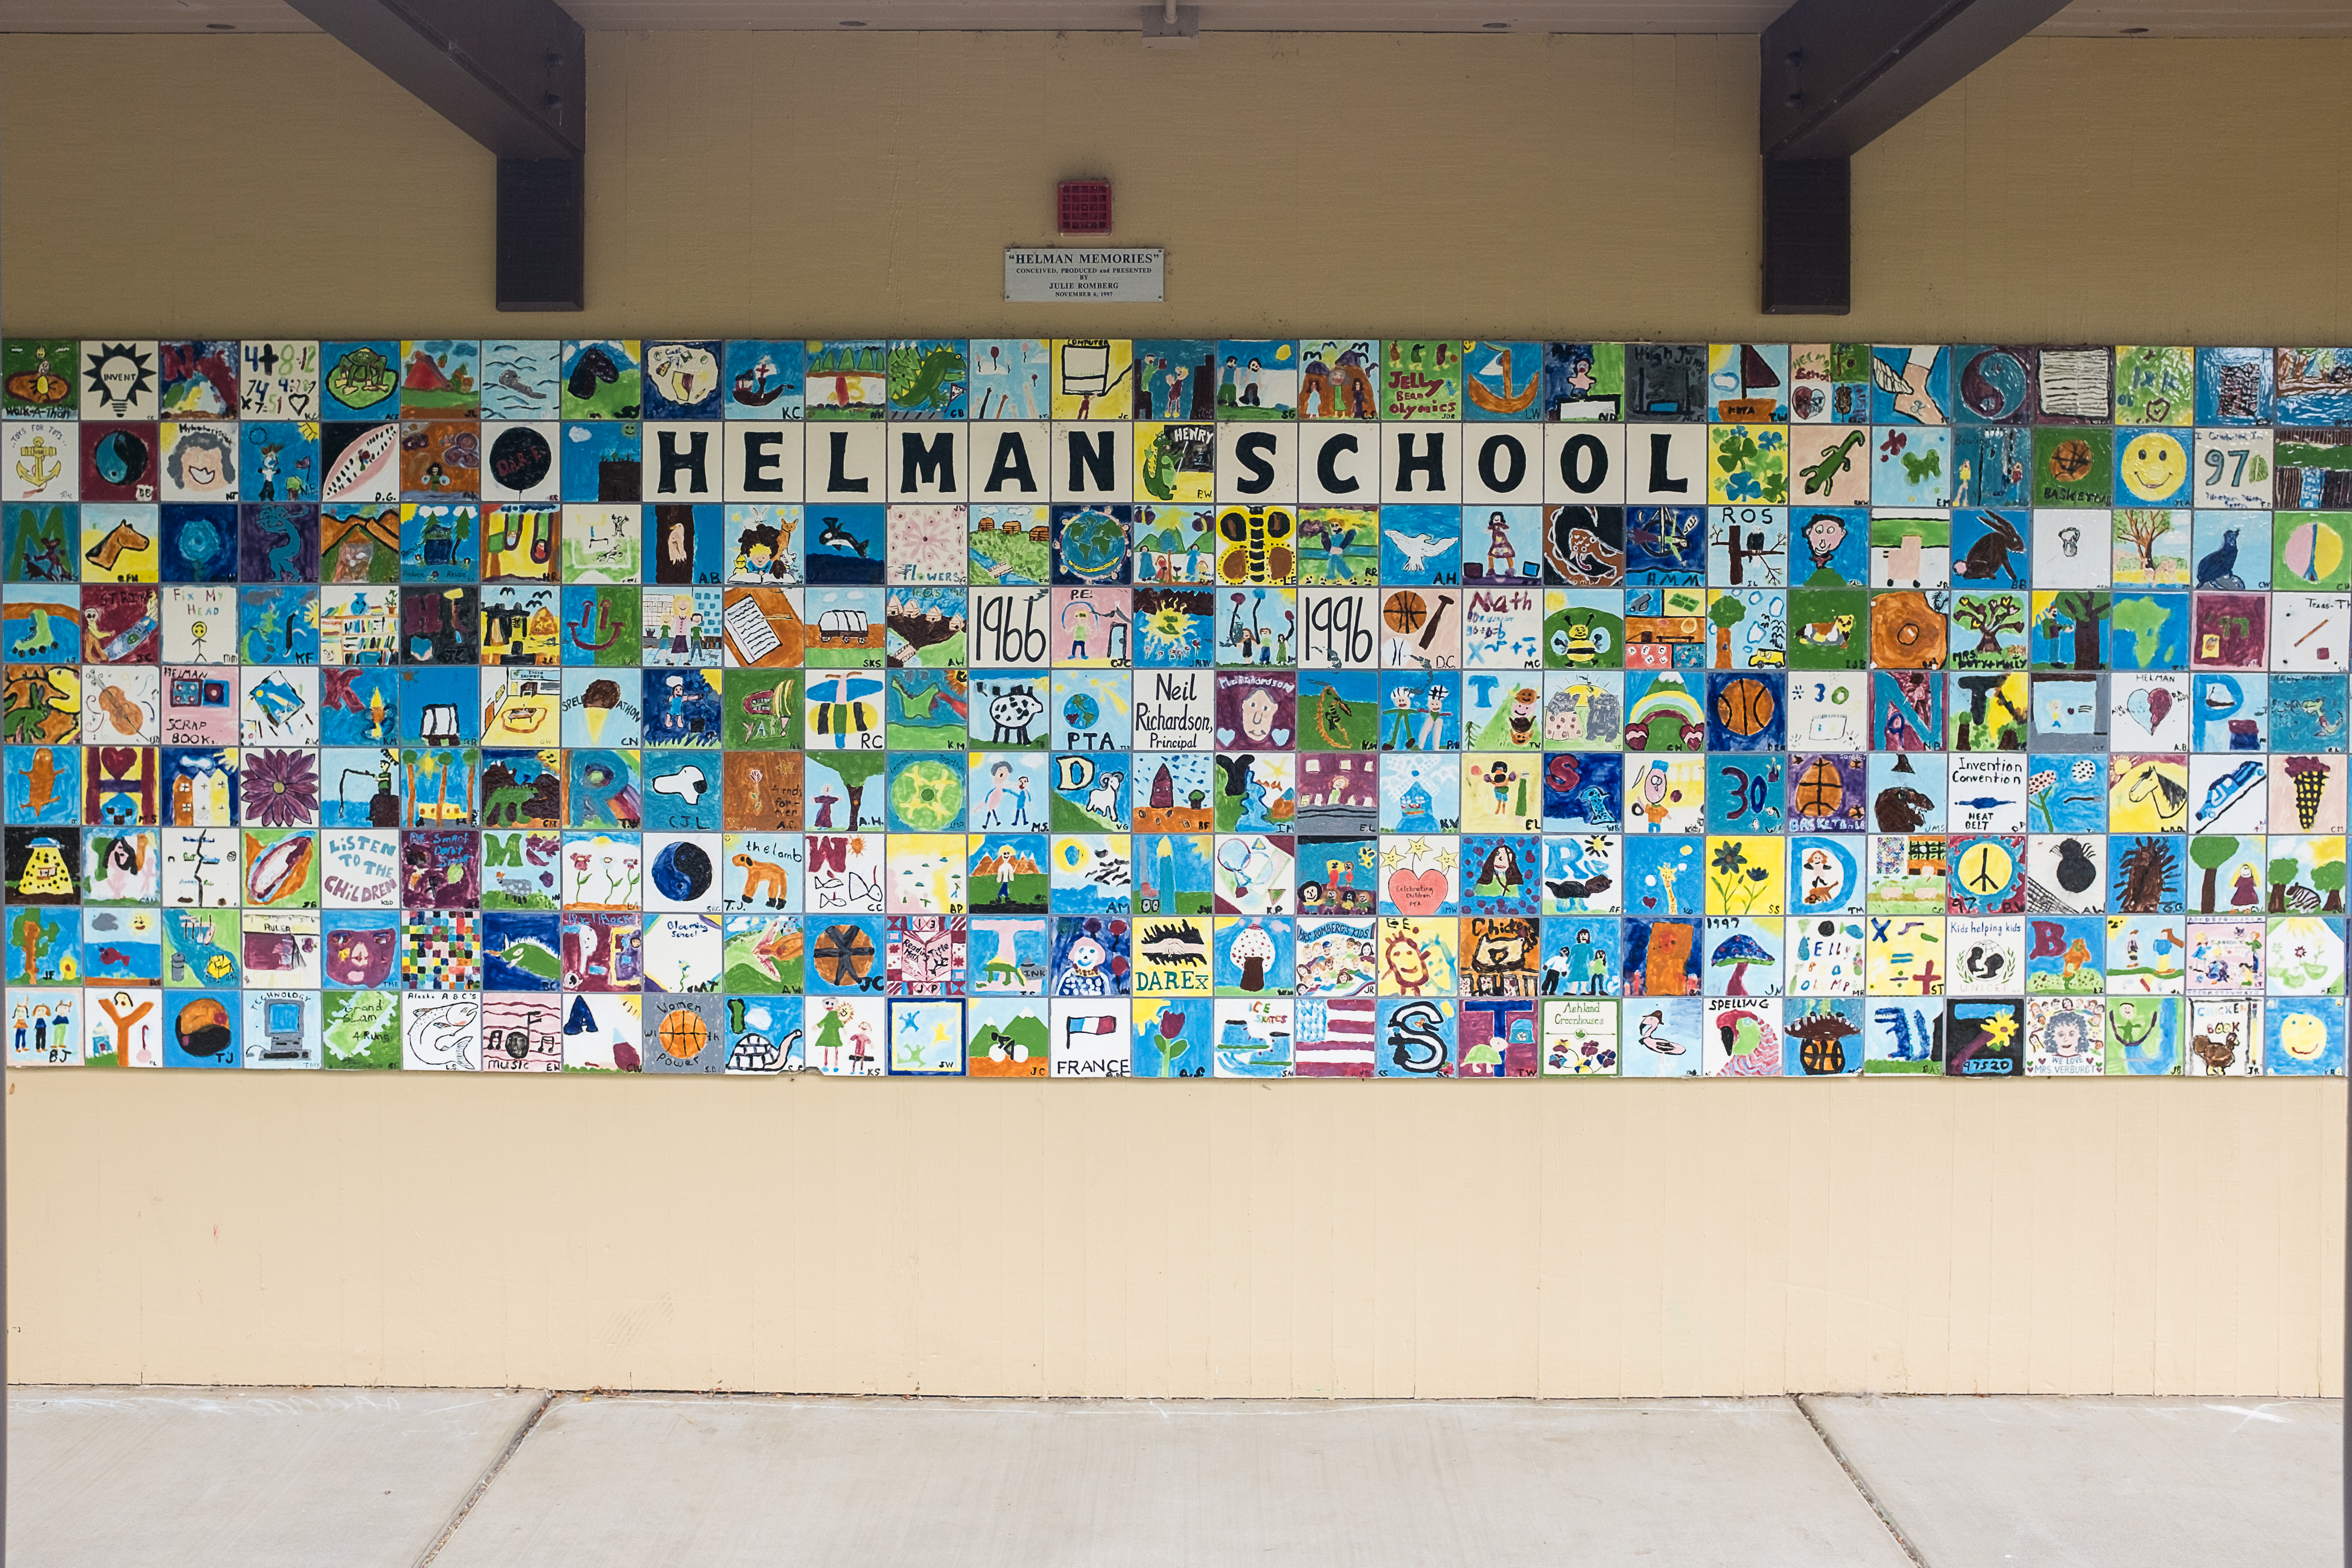 Artistic Expression at Helman School: A colorful mosaic of student-created tiles adorns the wall, each tile showcasing individual creativity and commemorating the vibrant spirit of Helman School.